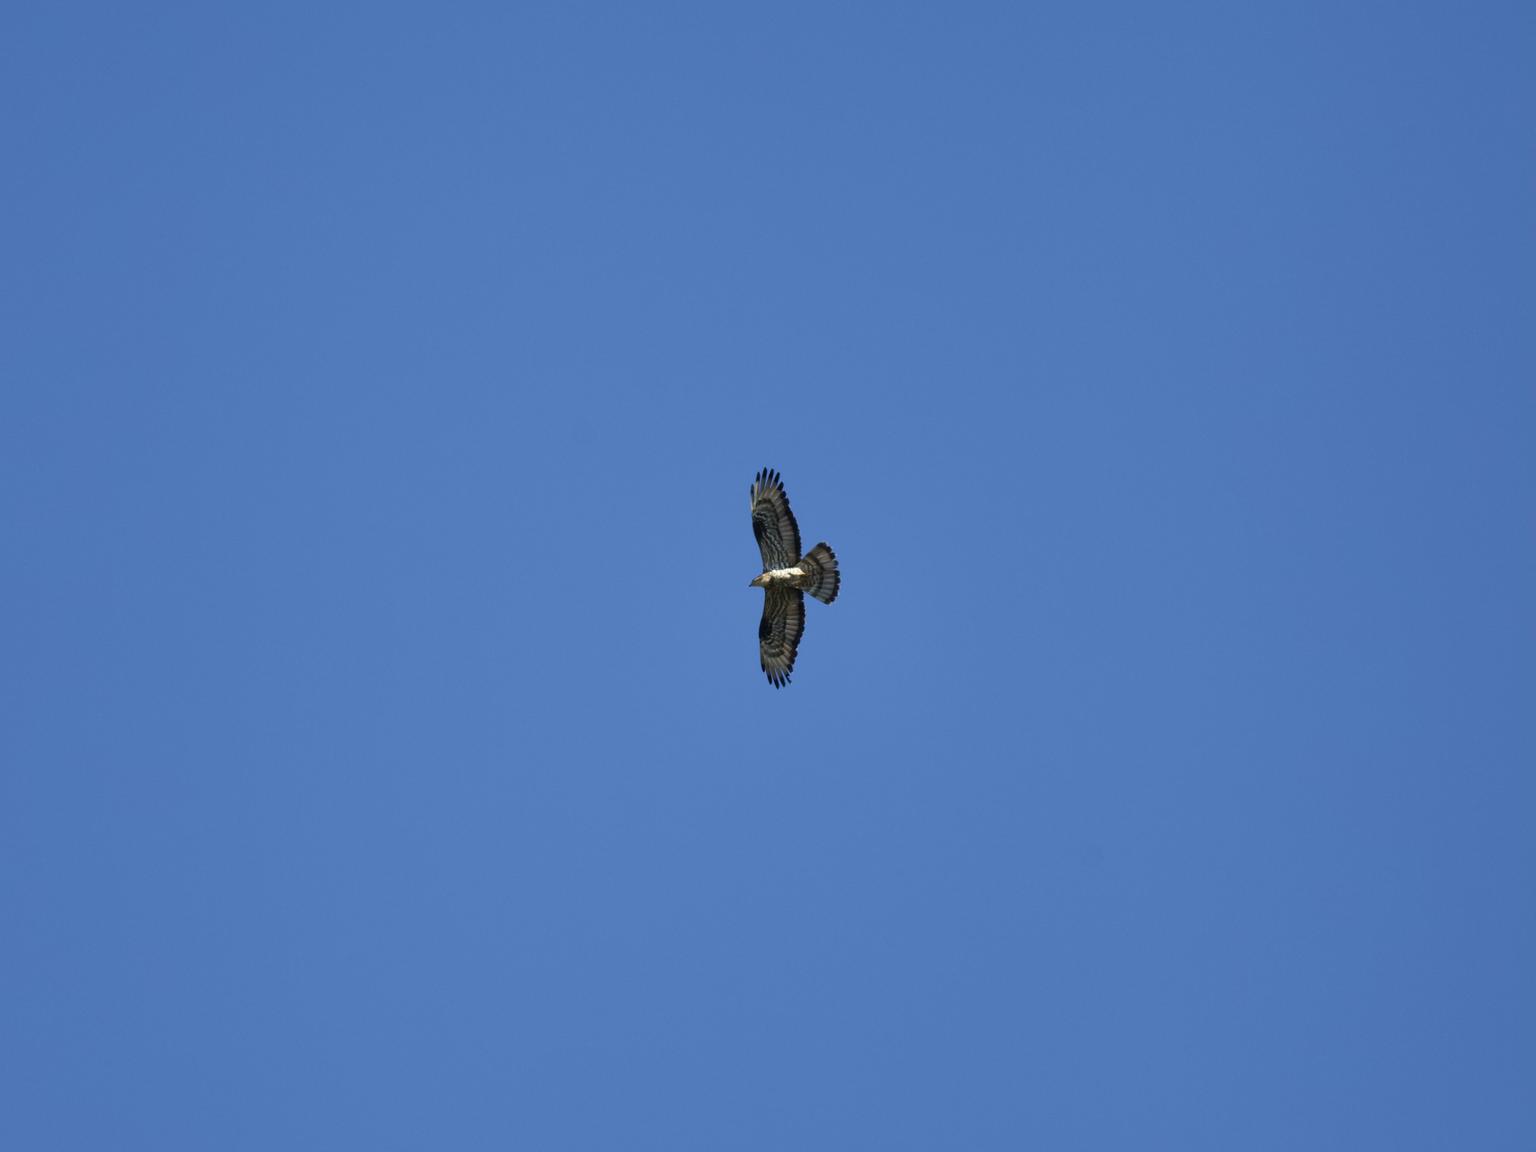 One of the many honey buzzards we saw